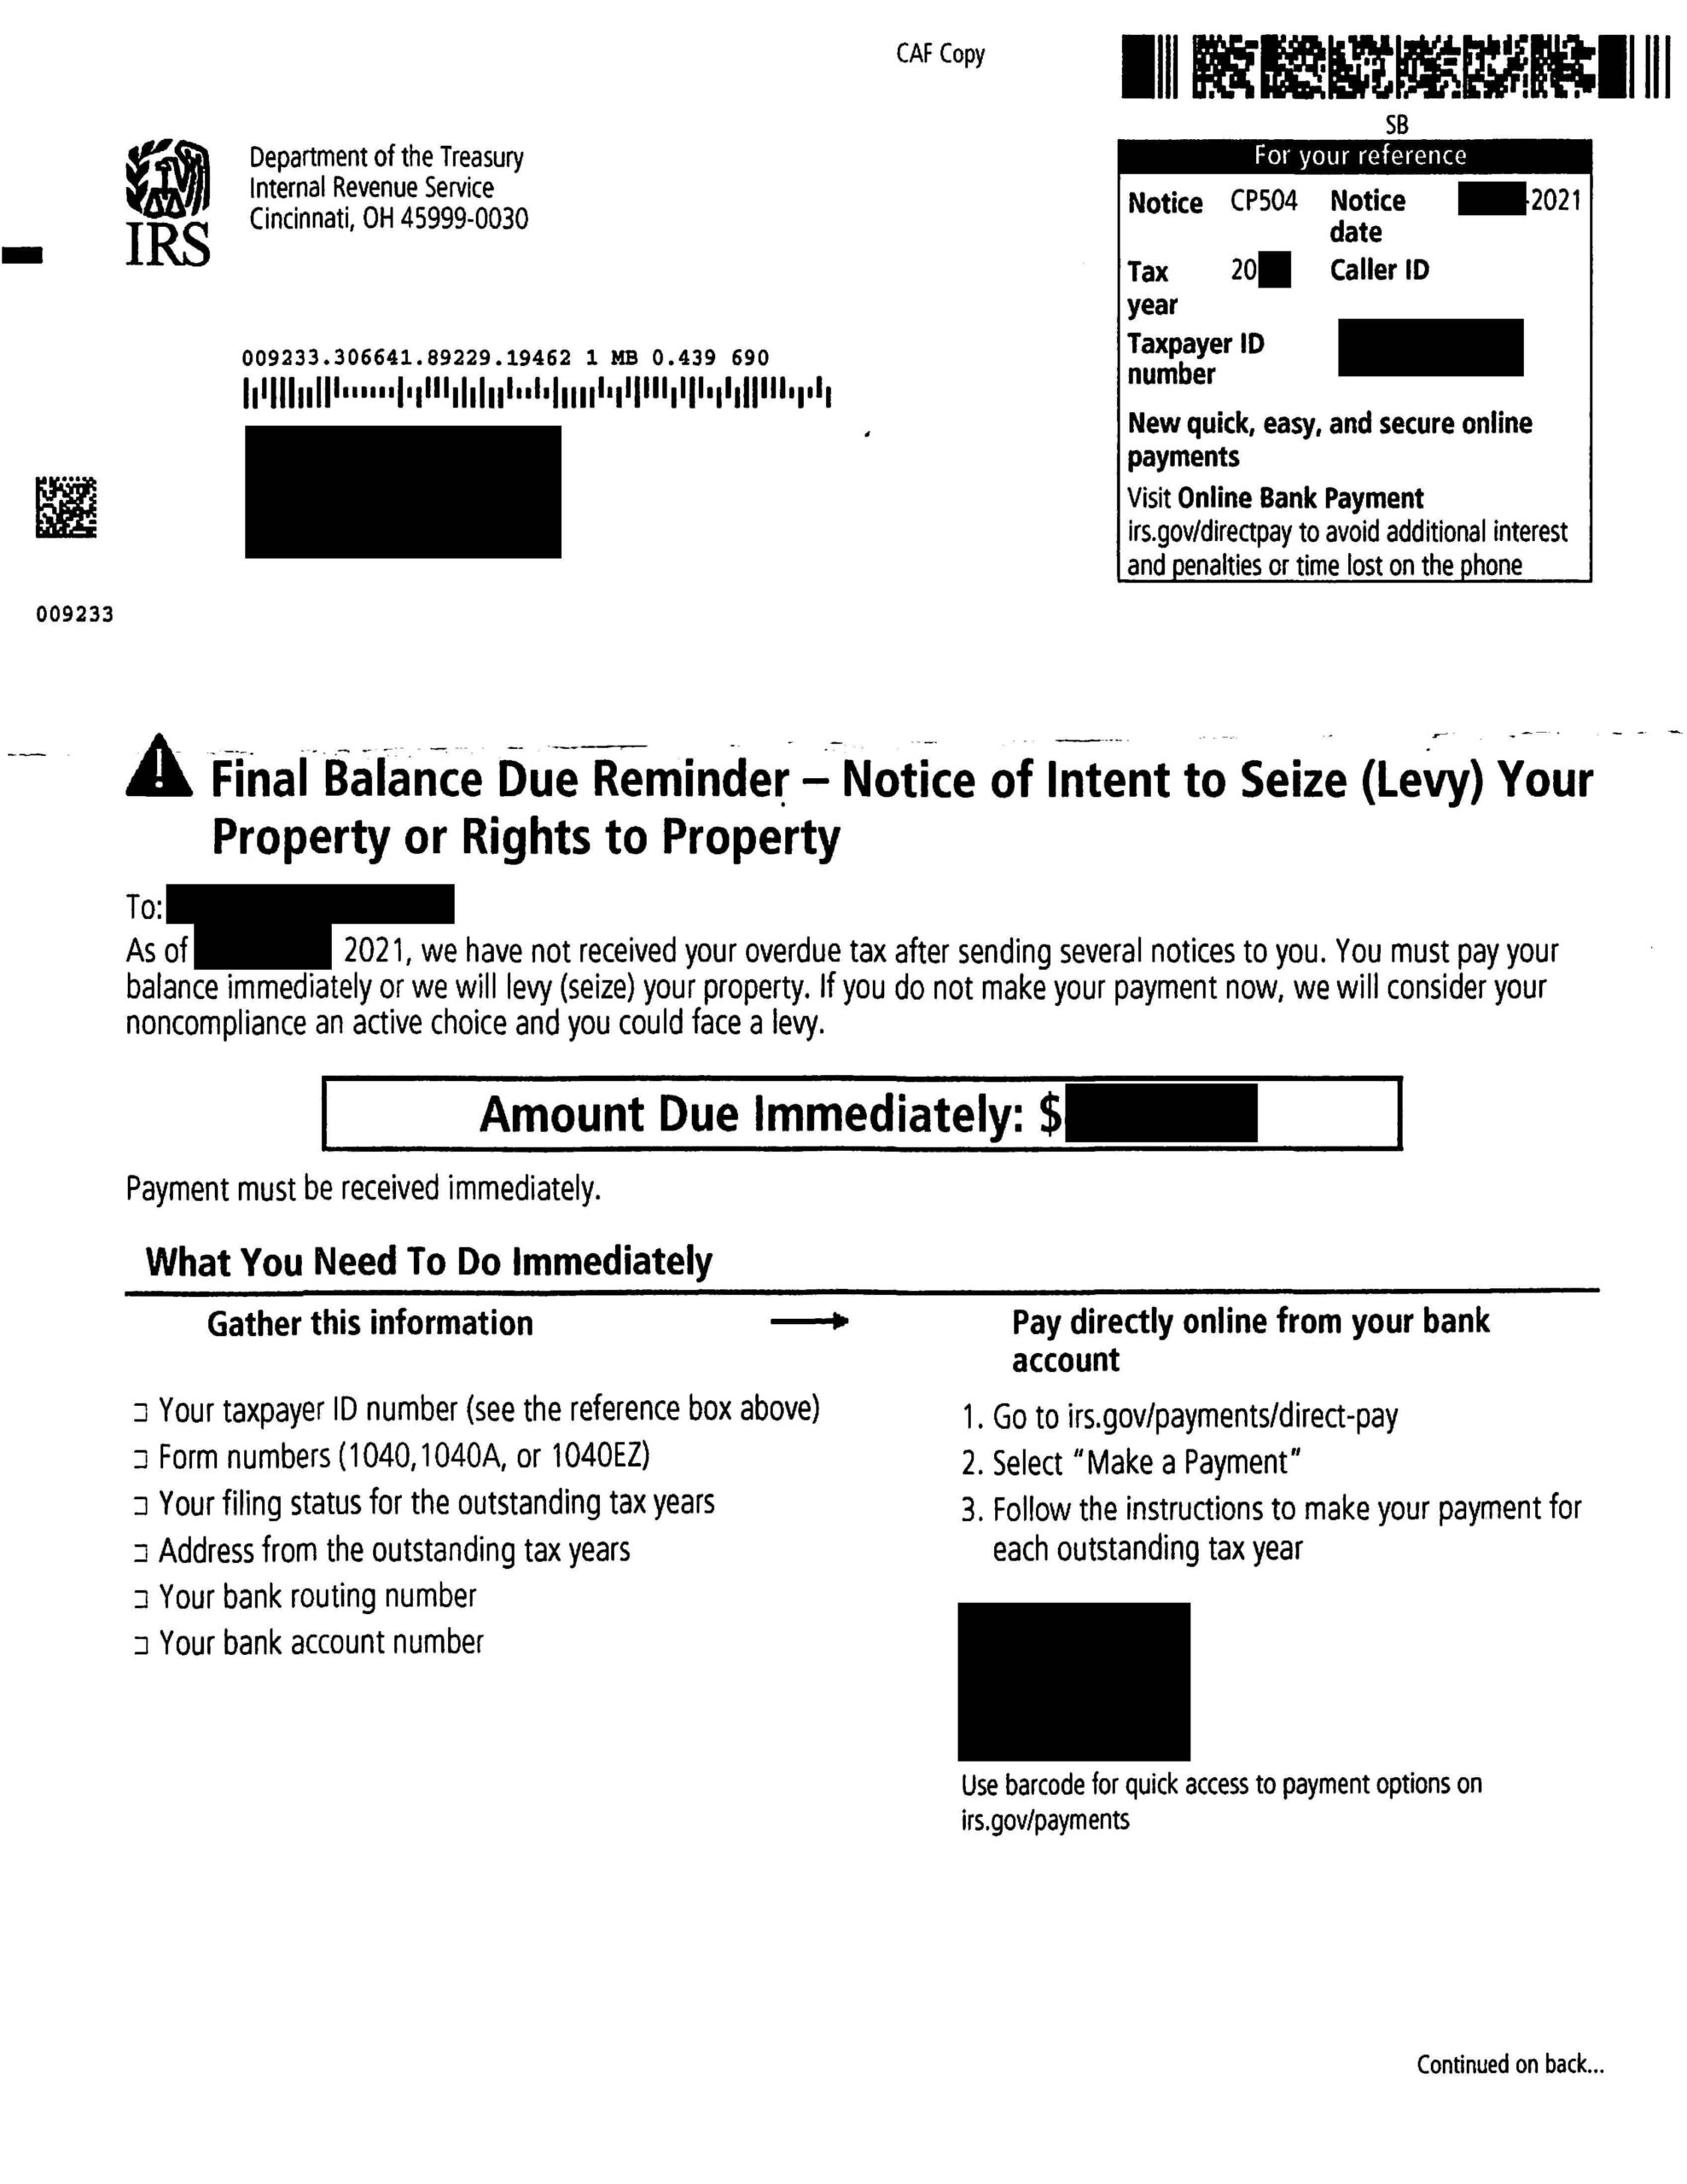 IRS Document, Scanned (Featured Image) | Federal Tax Levy